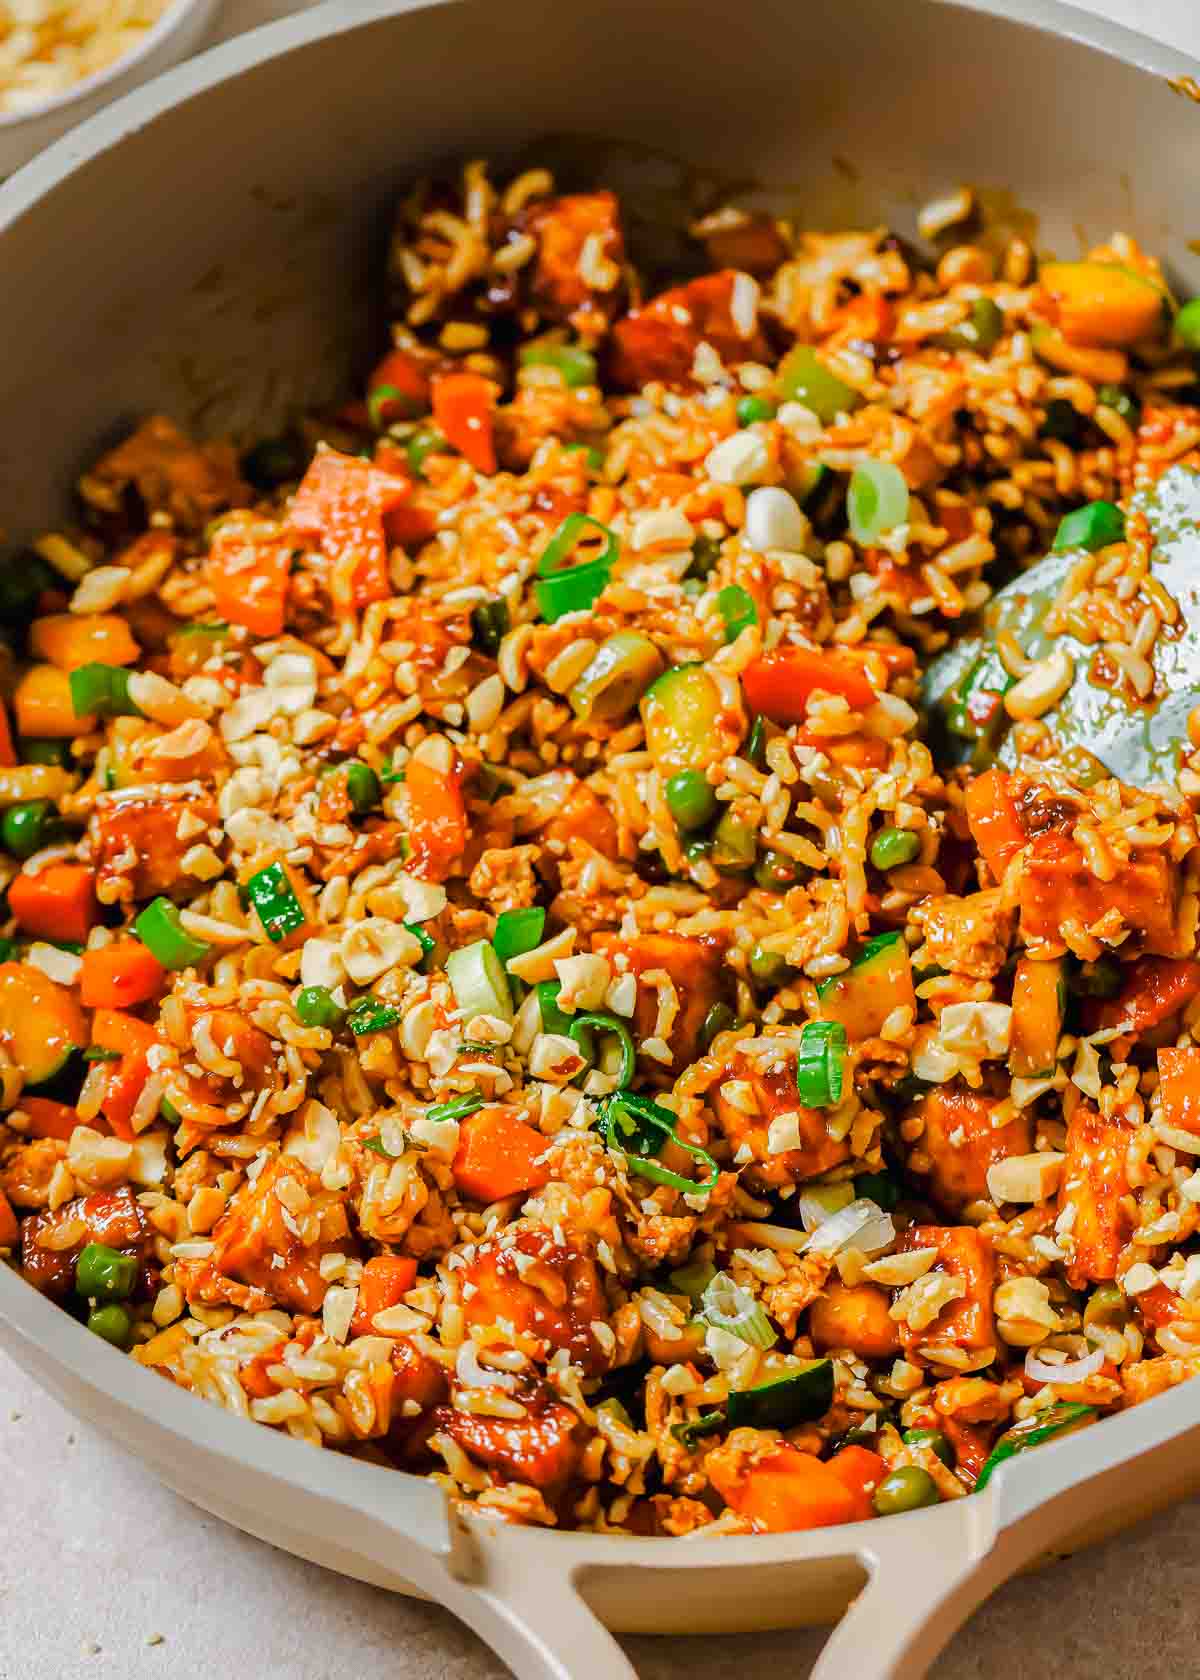 A skillet filled with tofu fried rice and vegetables.